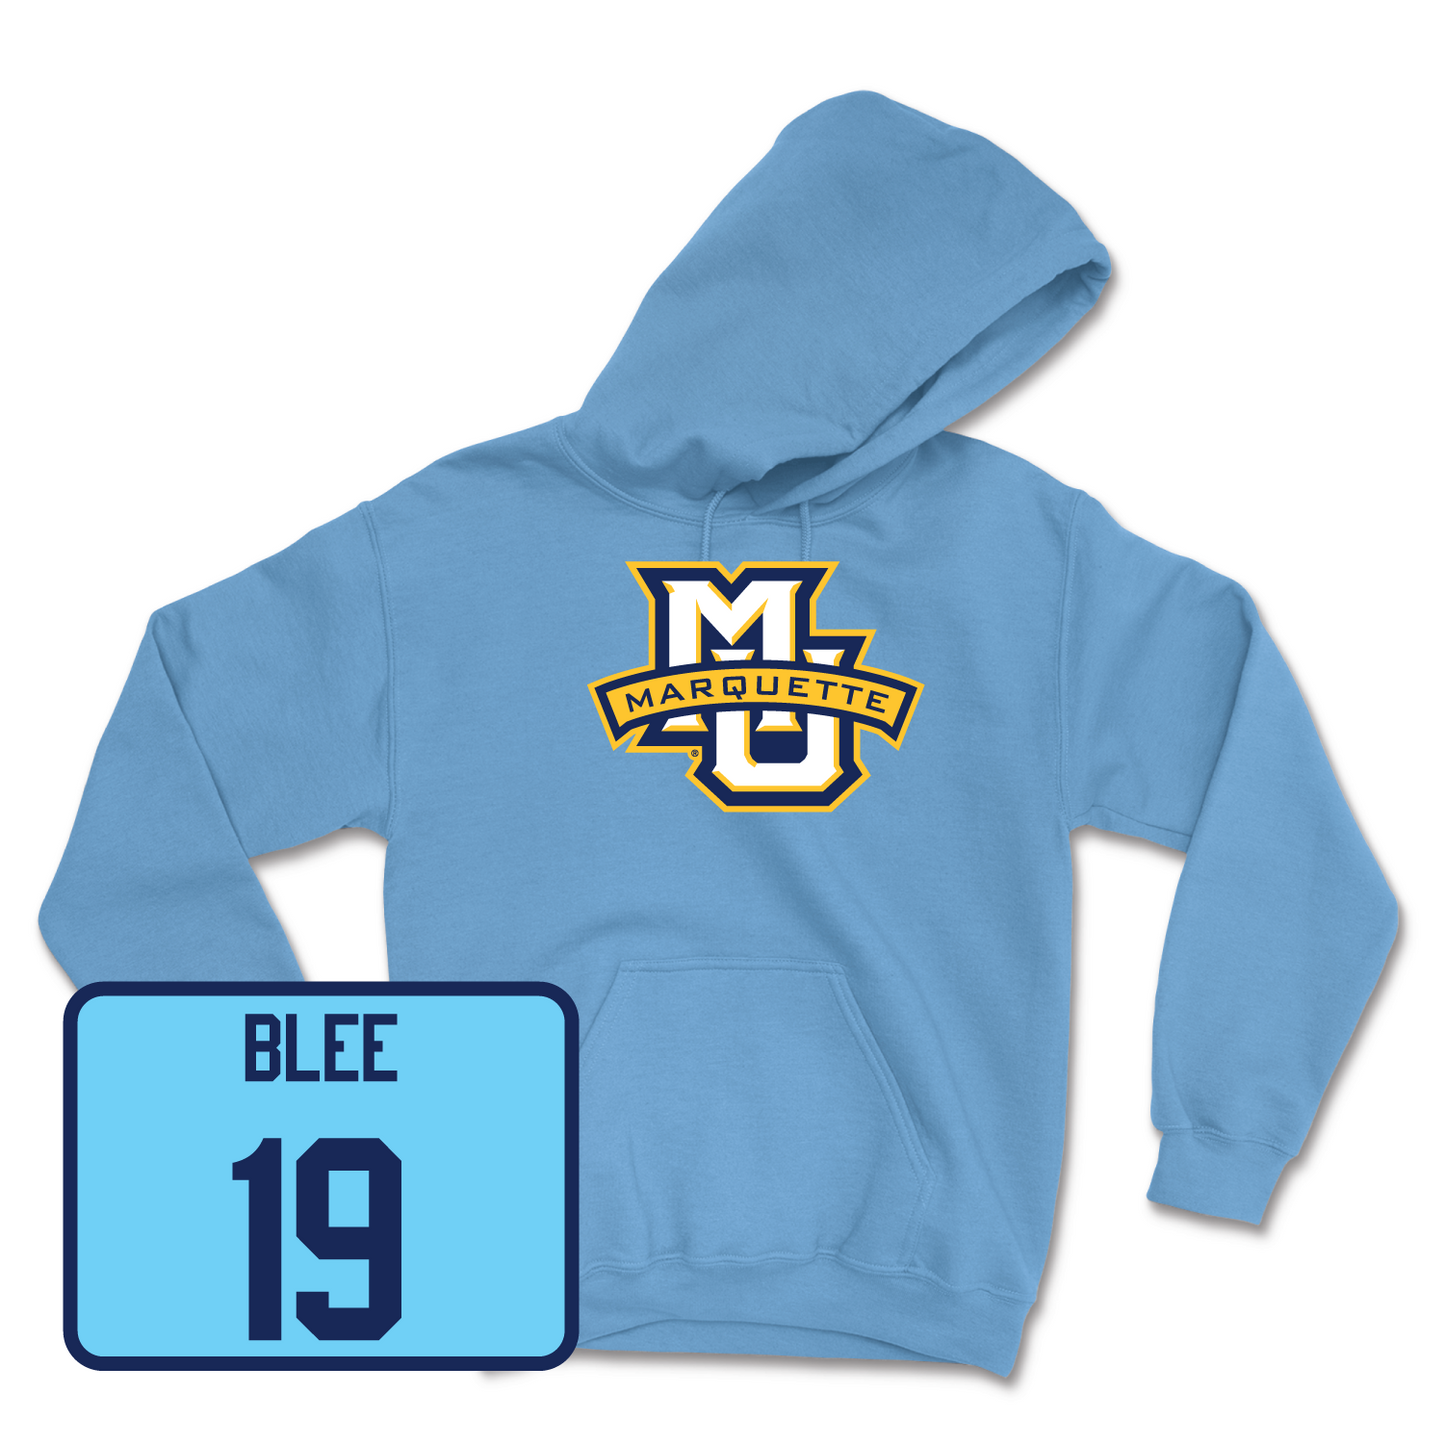 Championship Blue Women's Lacrosse Marquette Hoodie 2 Youth Large / Mary Blee | #19